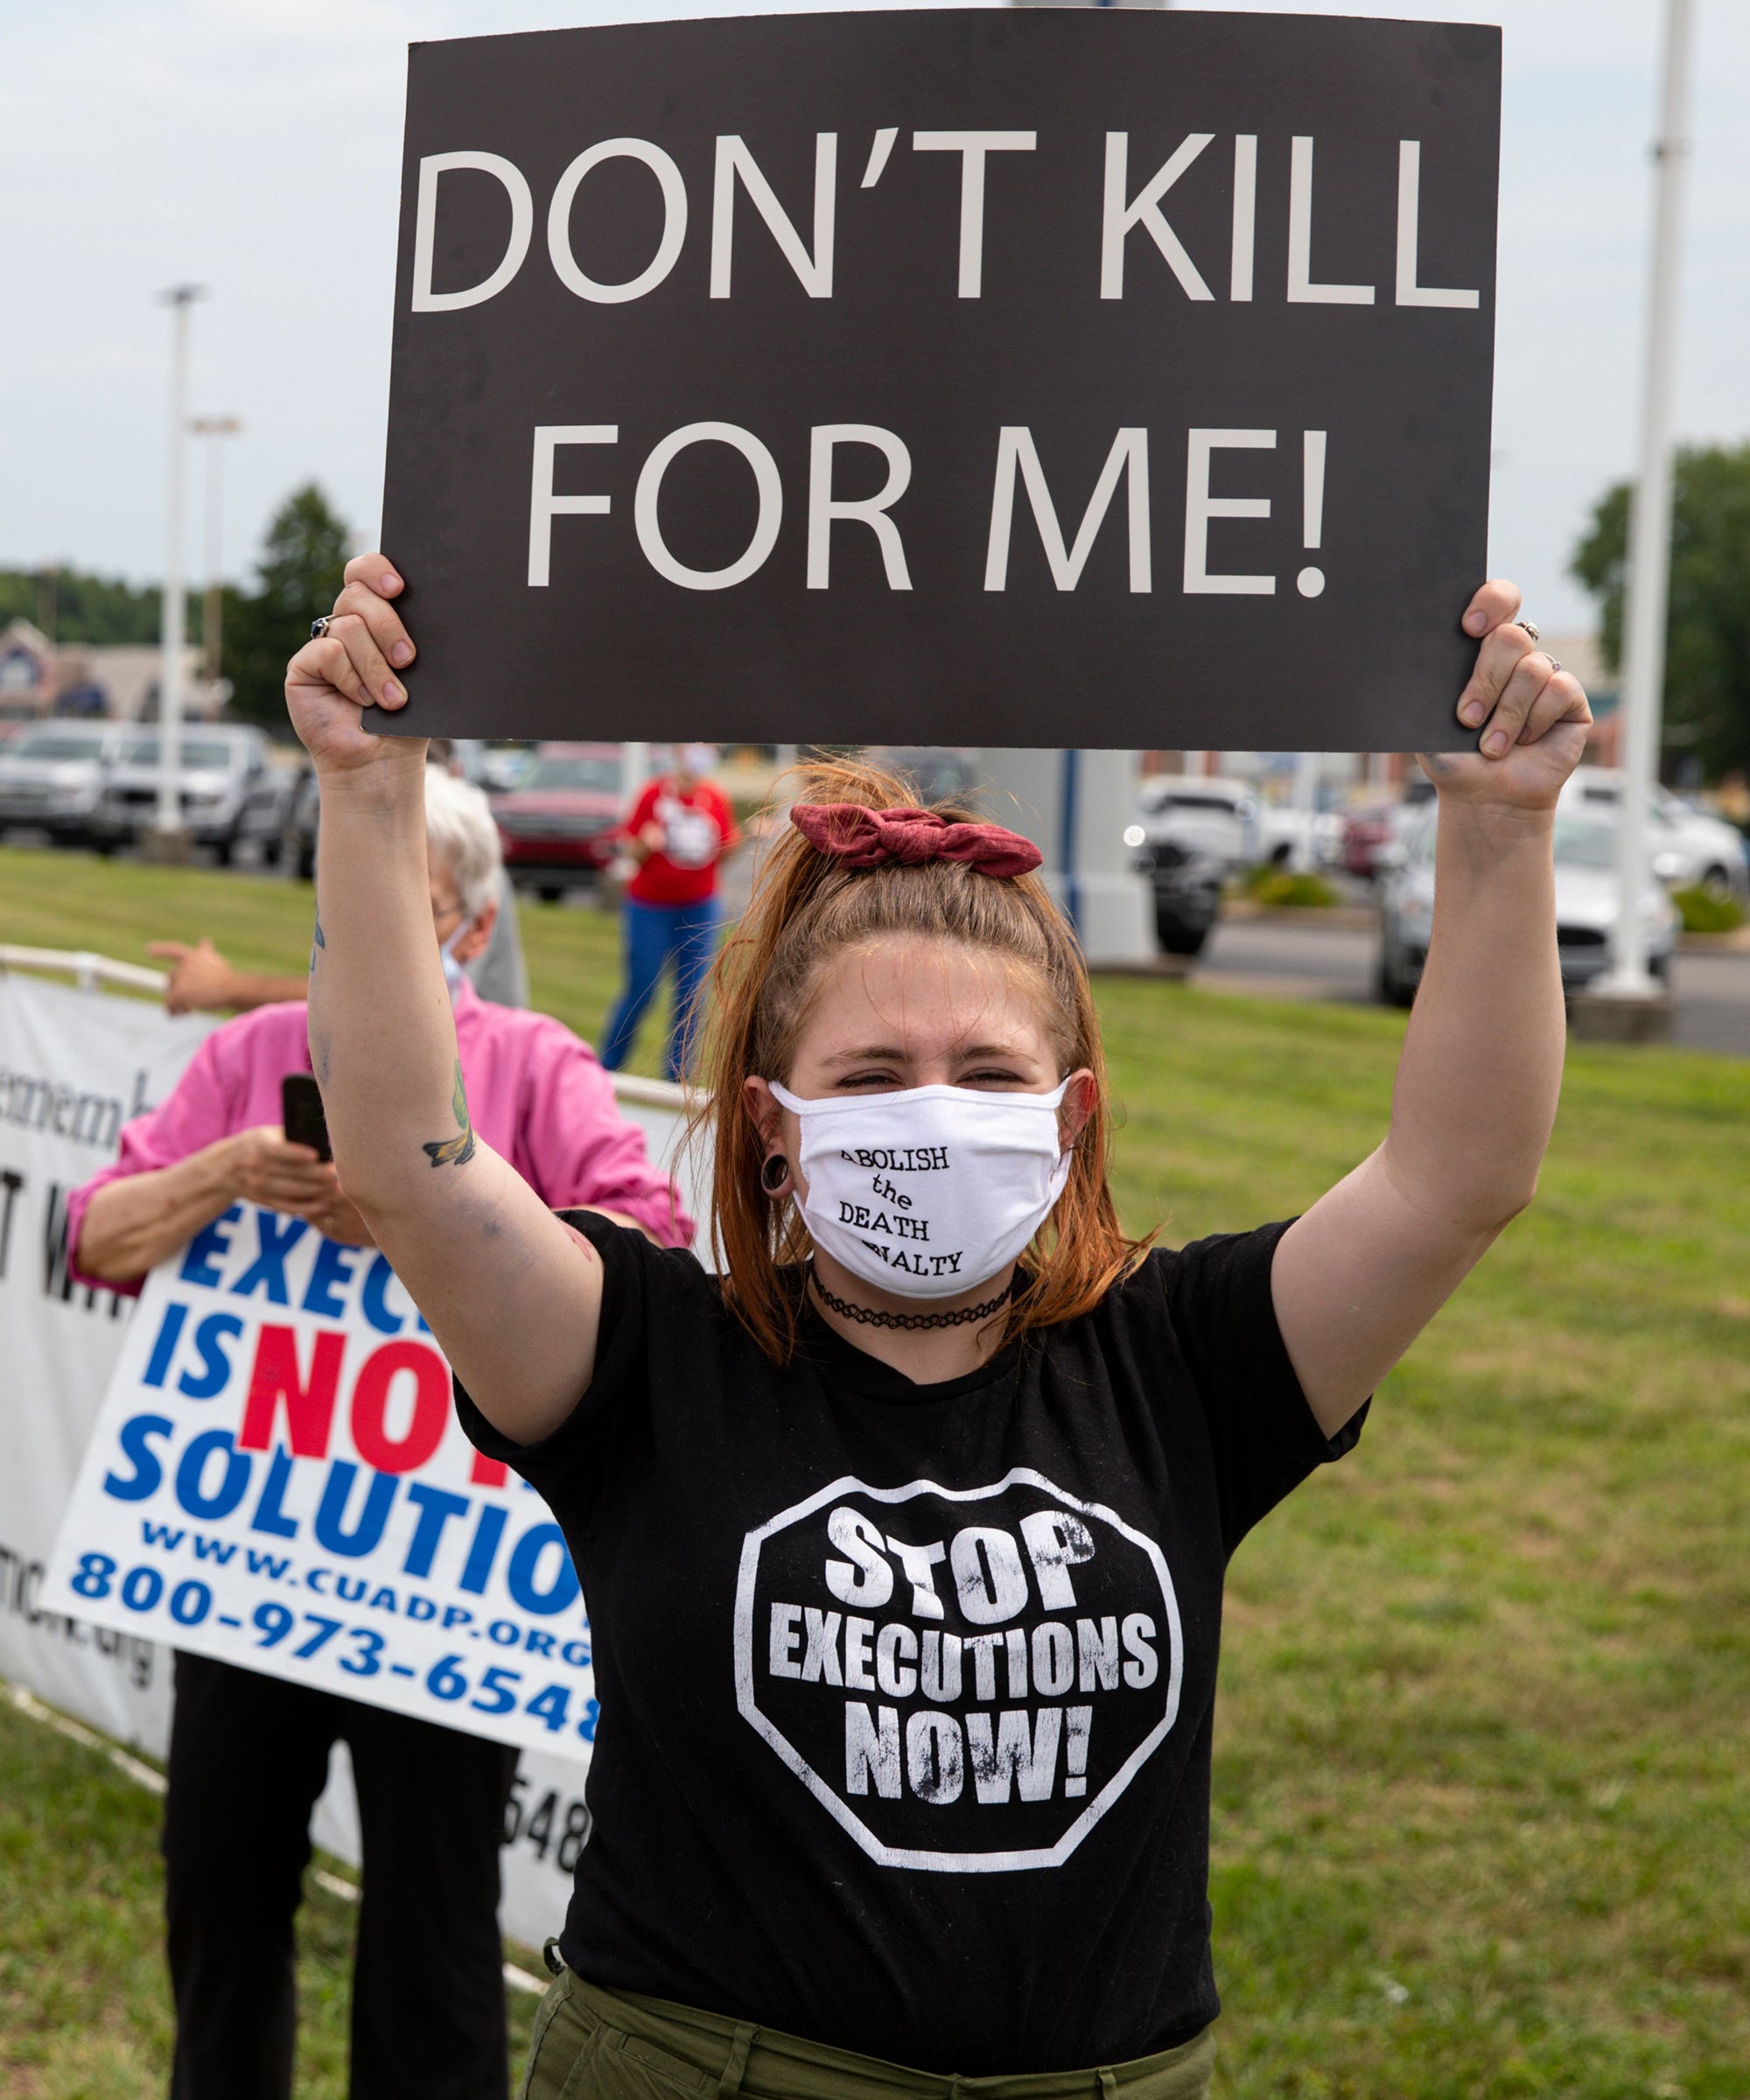 Woman Wearing A Black Shirt Holding Don't Kill For Me Sign